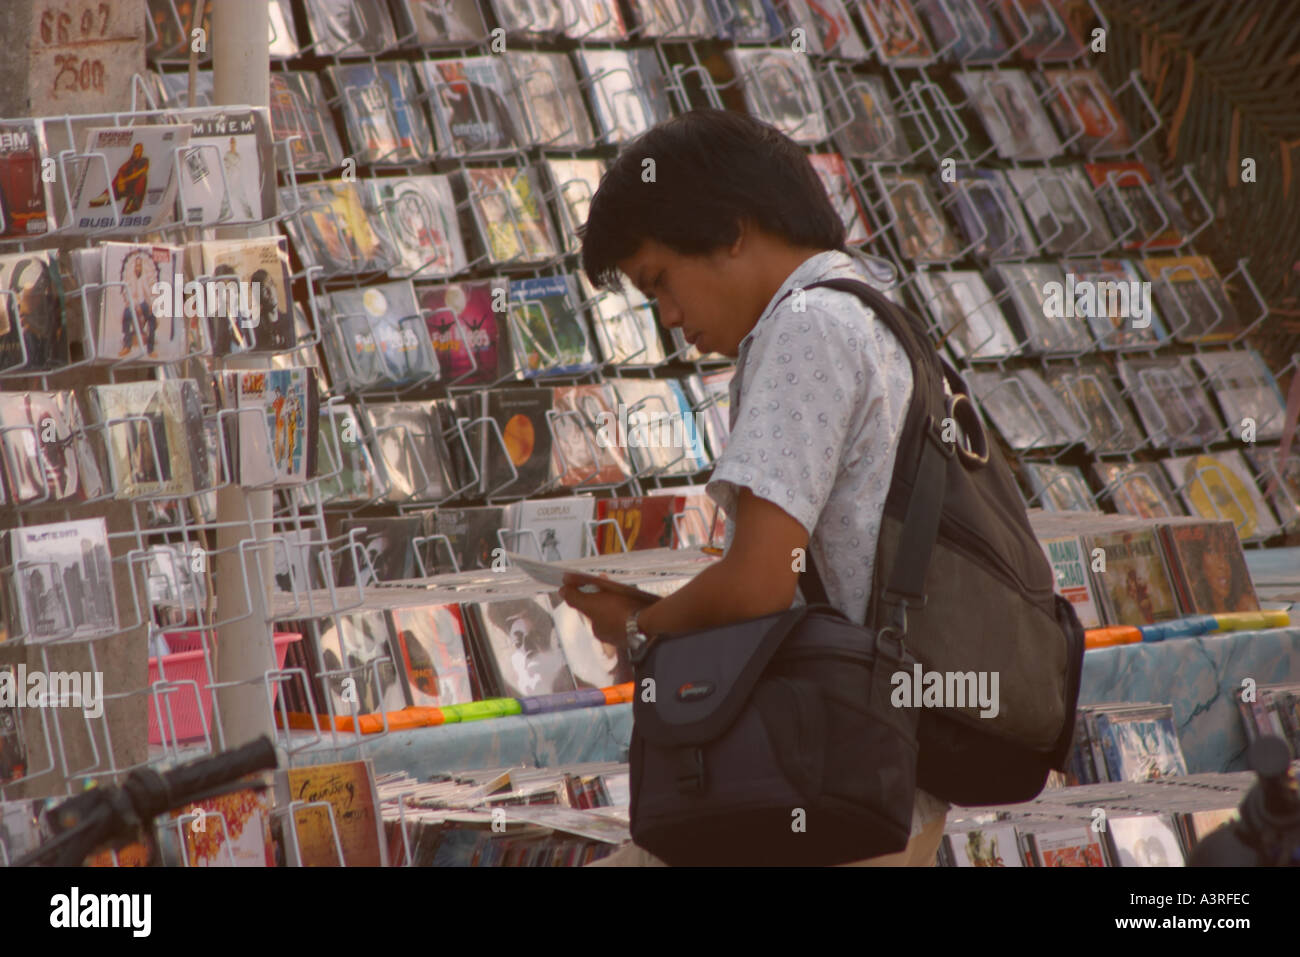 Person Looking at Illegal Copies of CD's and DVD's, Bangkok, Thailand Stock Photo